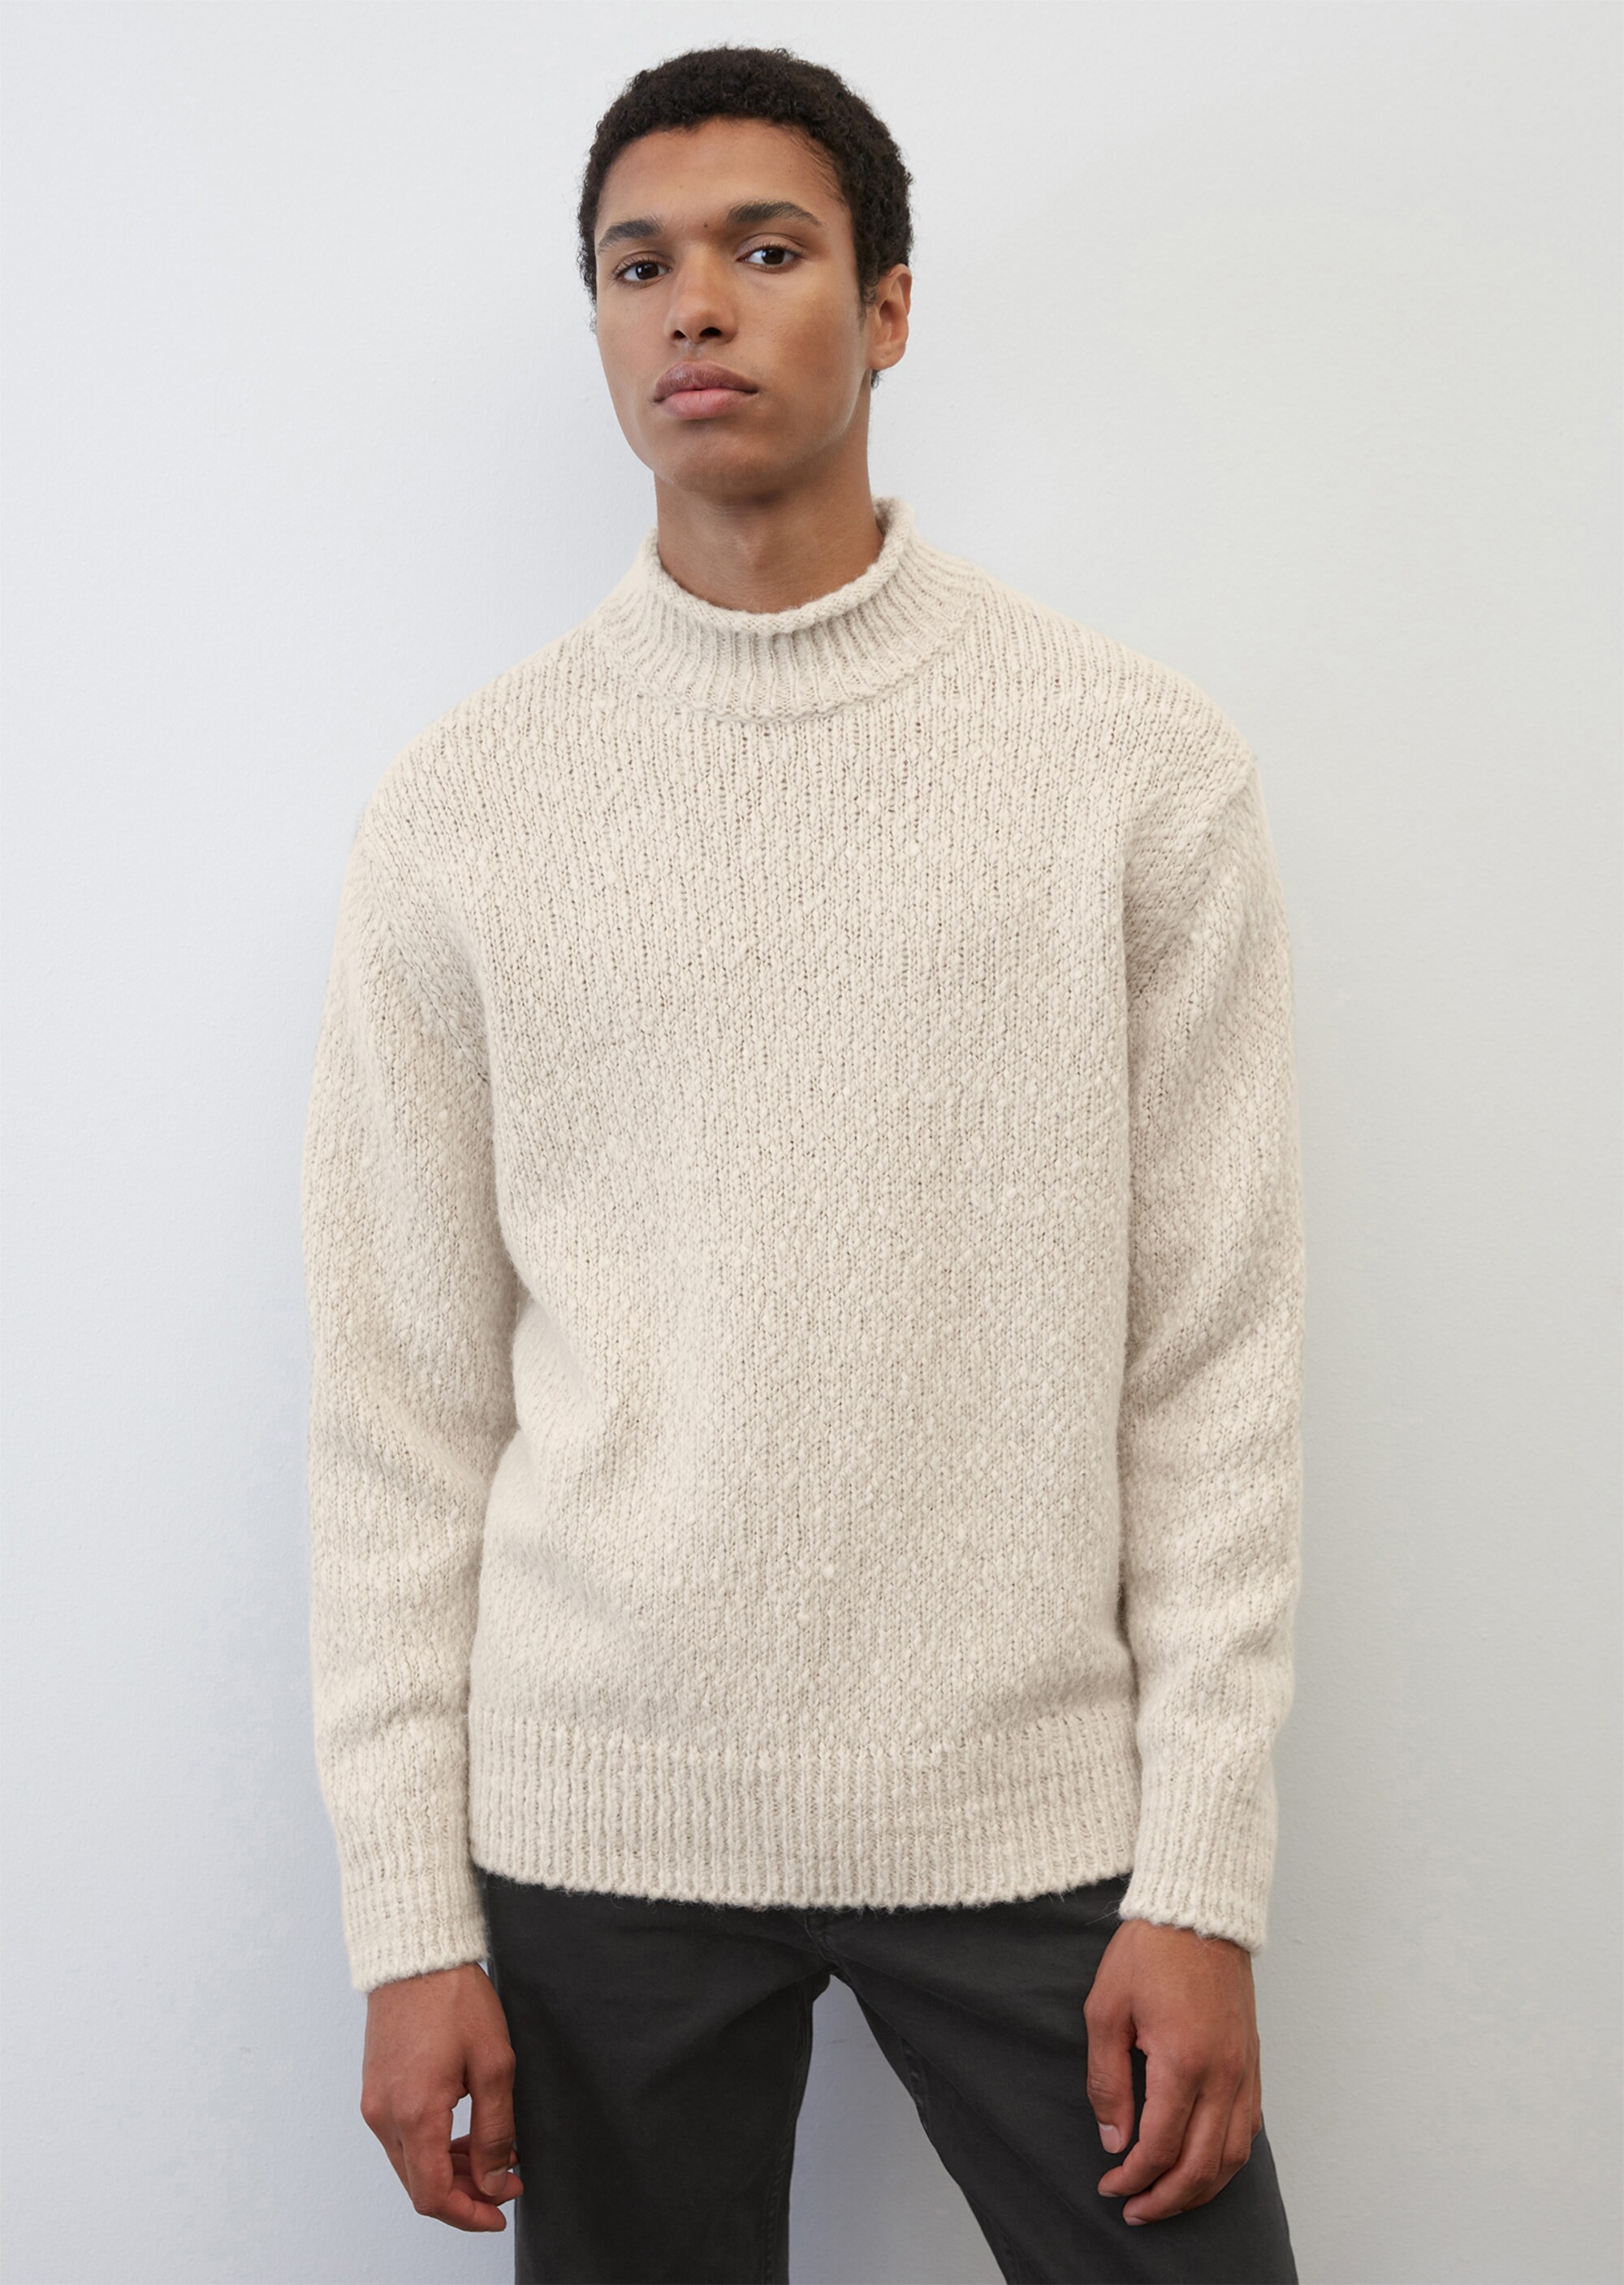 Campus by Marc O\u2019Polo Sweater met korte mouwen lichtgrijs casual uitstraling Mode Sweaters Sweaters met korte mouwen Campus by Marc O’Polo 